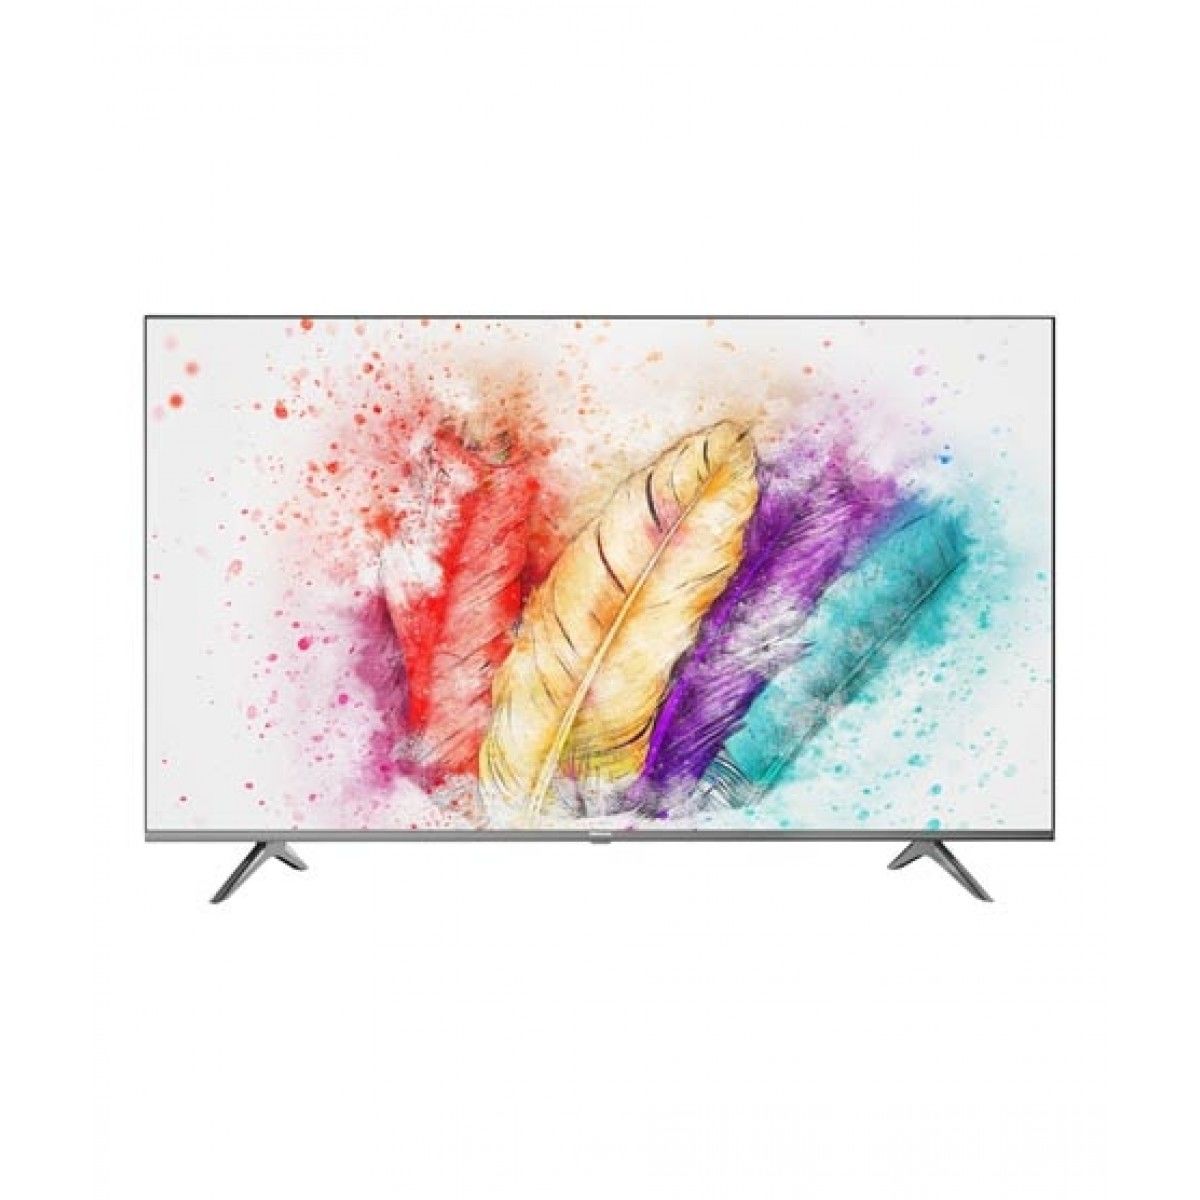 main land Spectacular Seaside Hisense 55 Inch 55A7400F LED TV Price in Pakistan - Price Updated Oct 2022